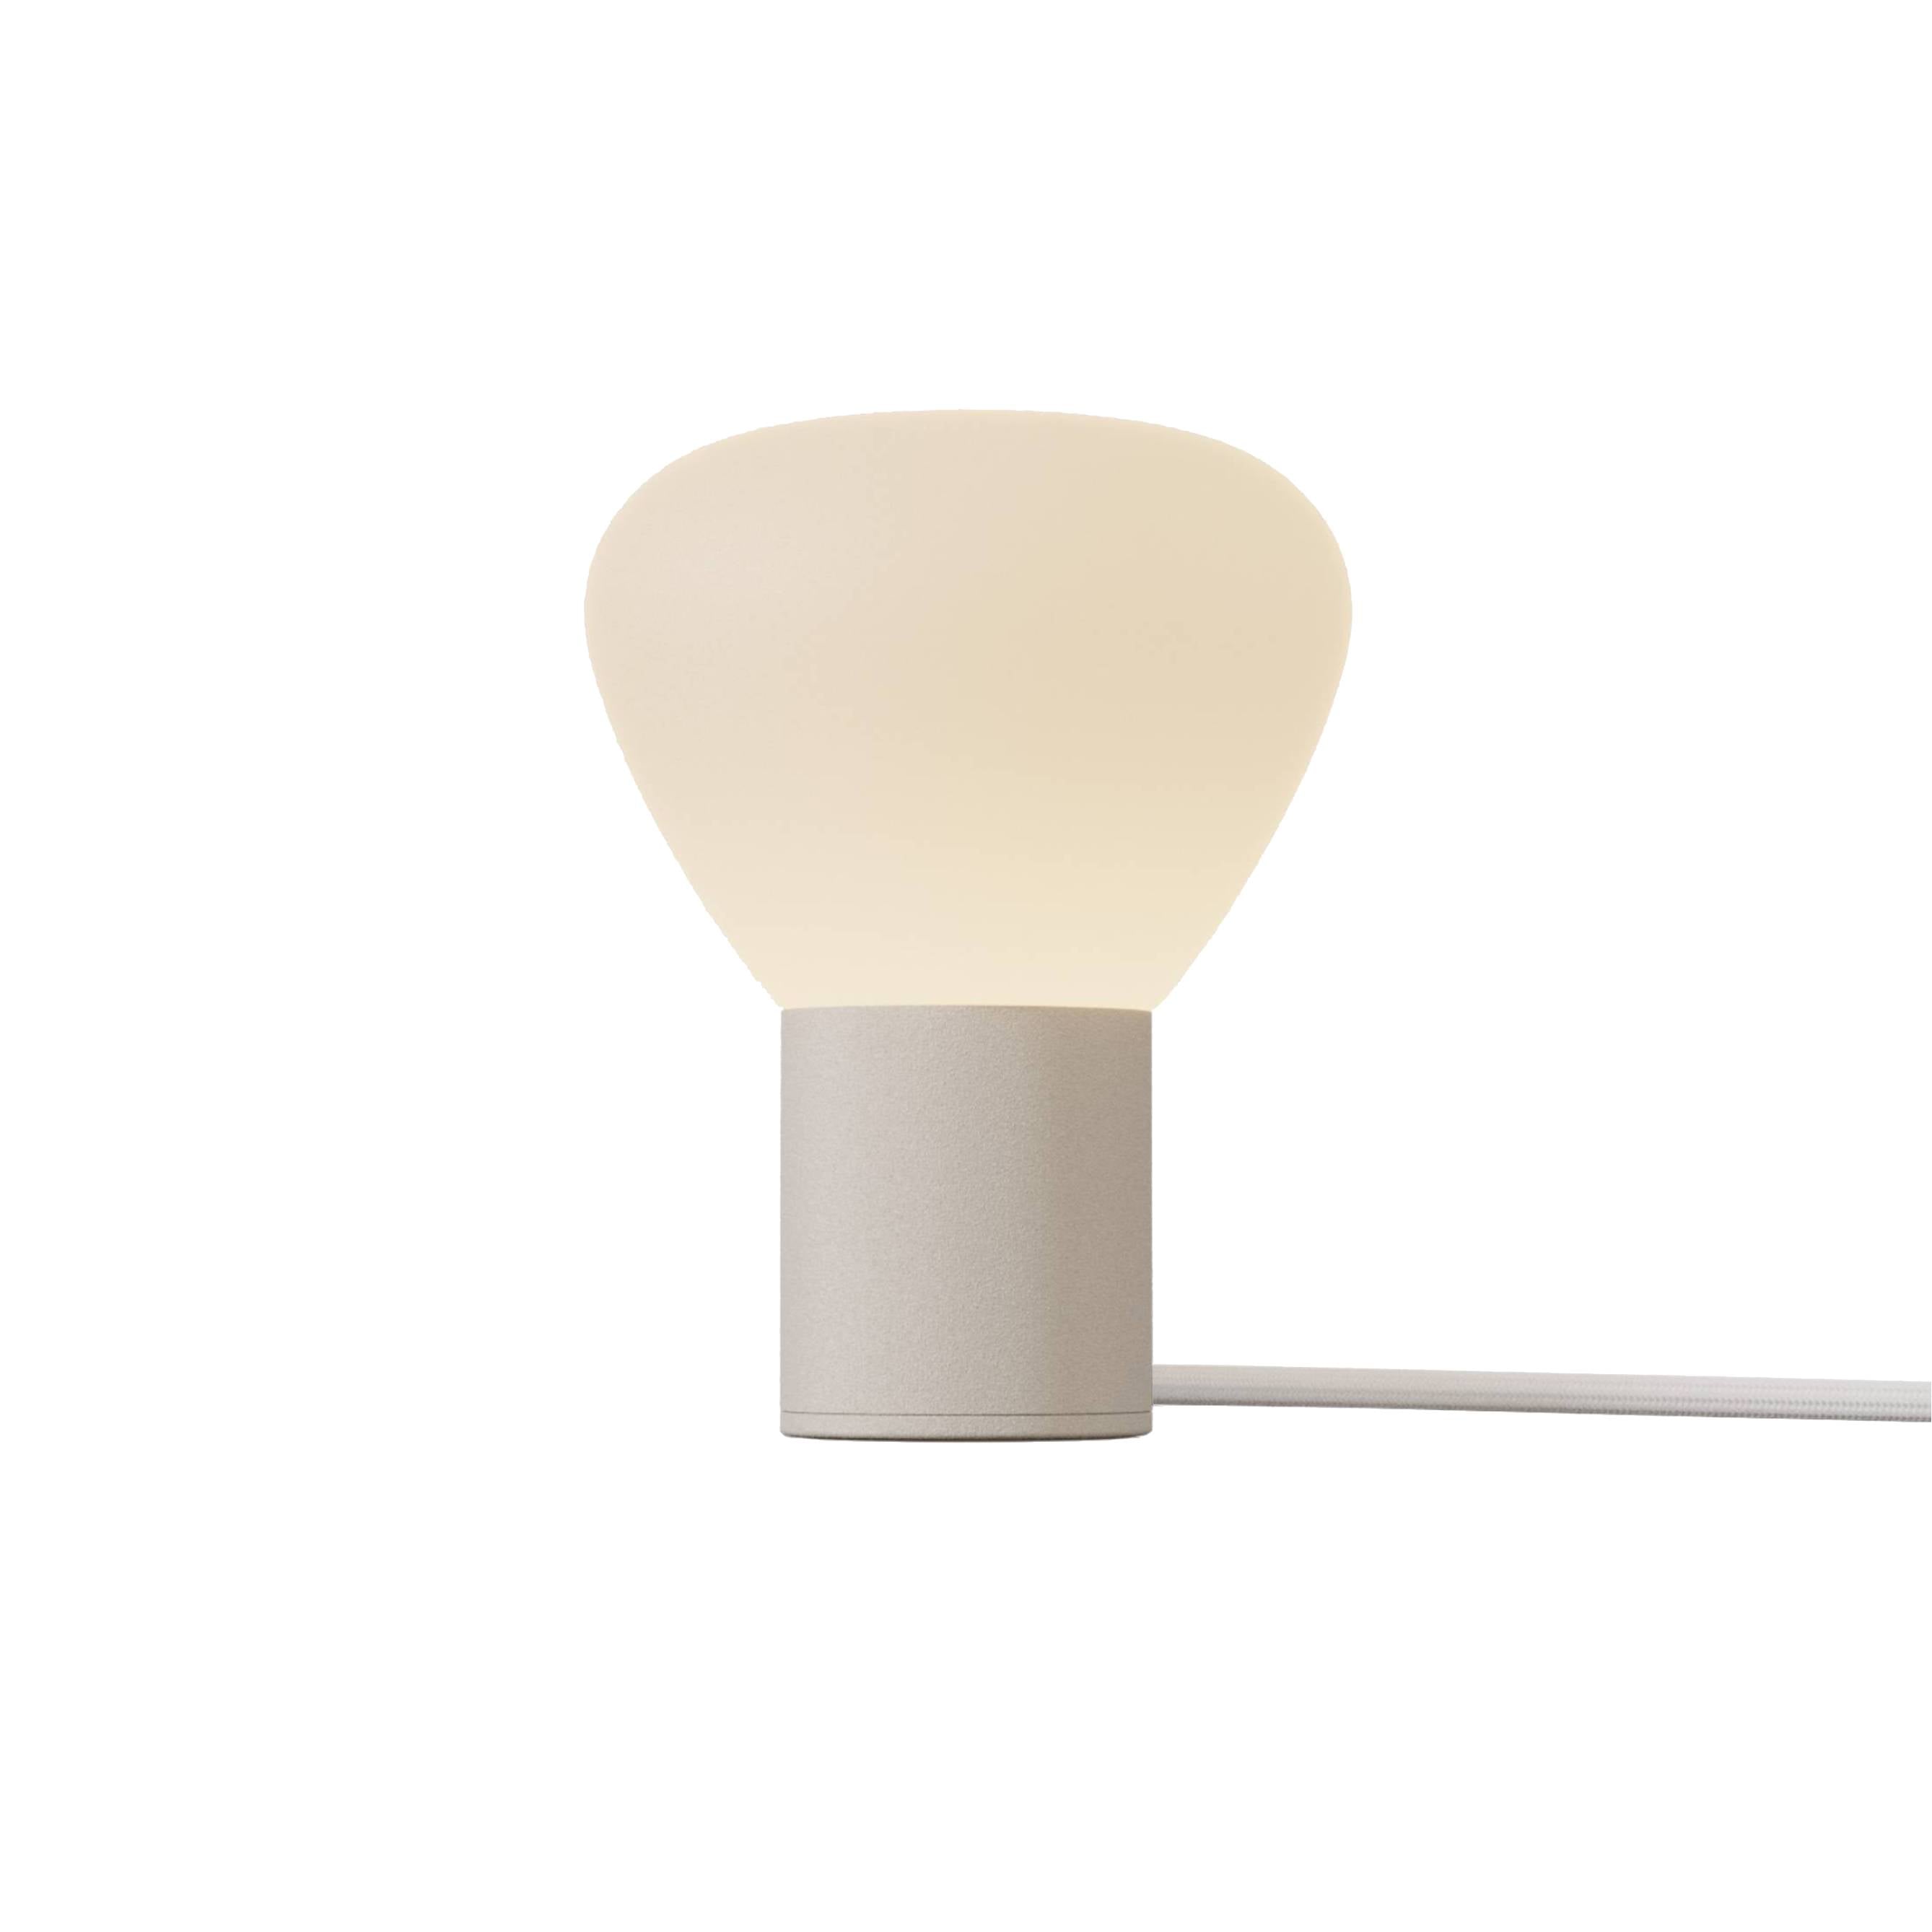 Parc 01 Table Lamp: Footswitch +  Beige + White